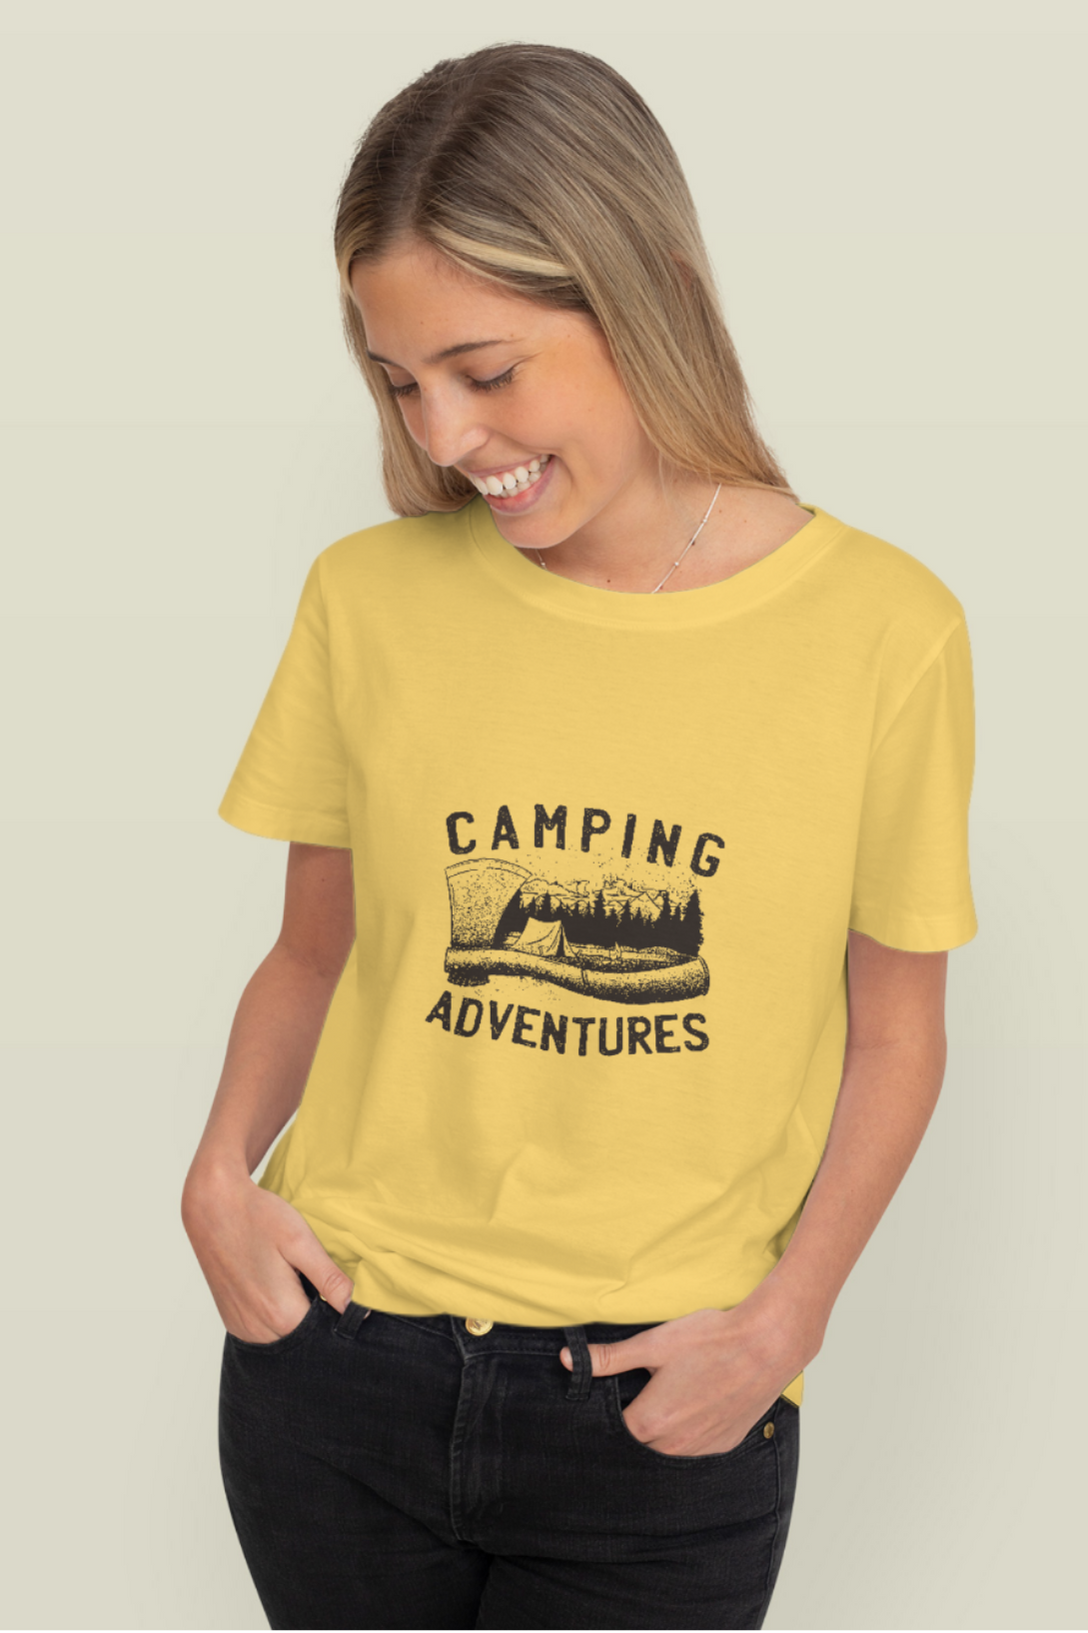 Camping Adventures Printed T-Shirt For Women - WowWaves - 7